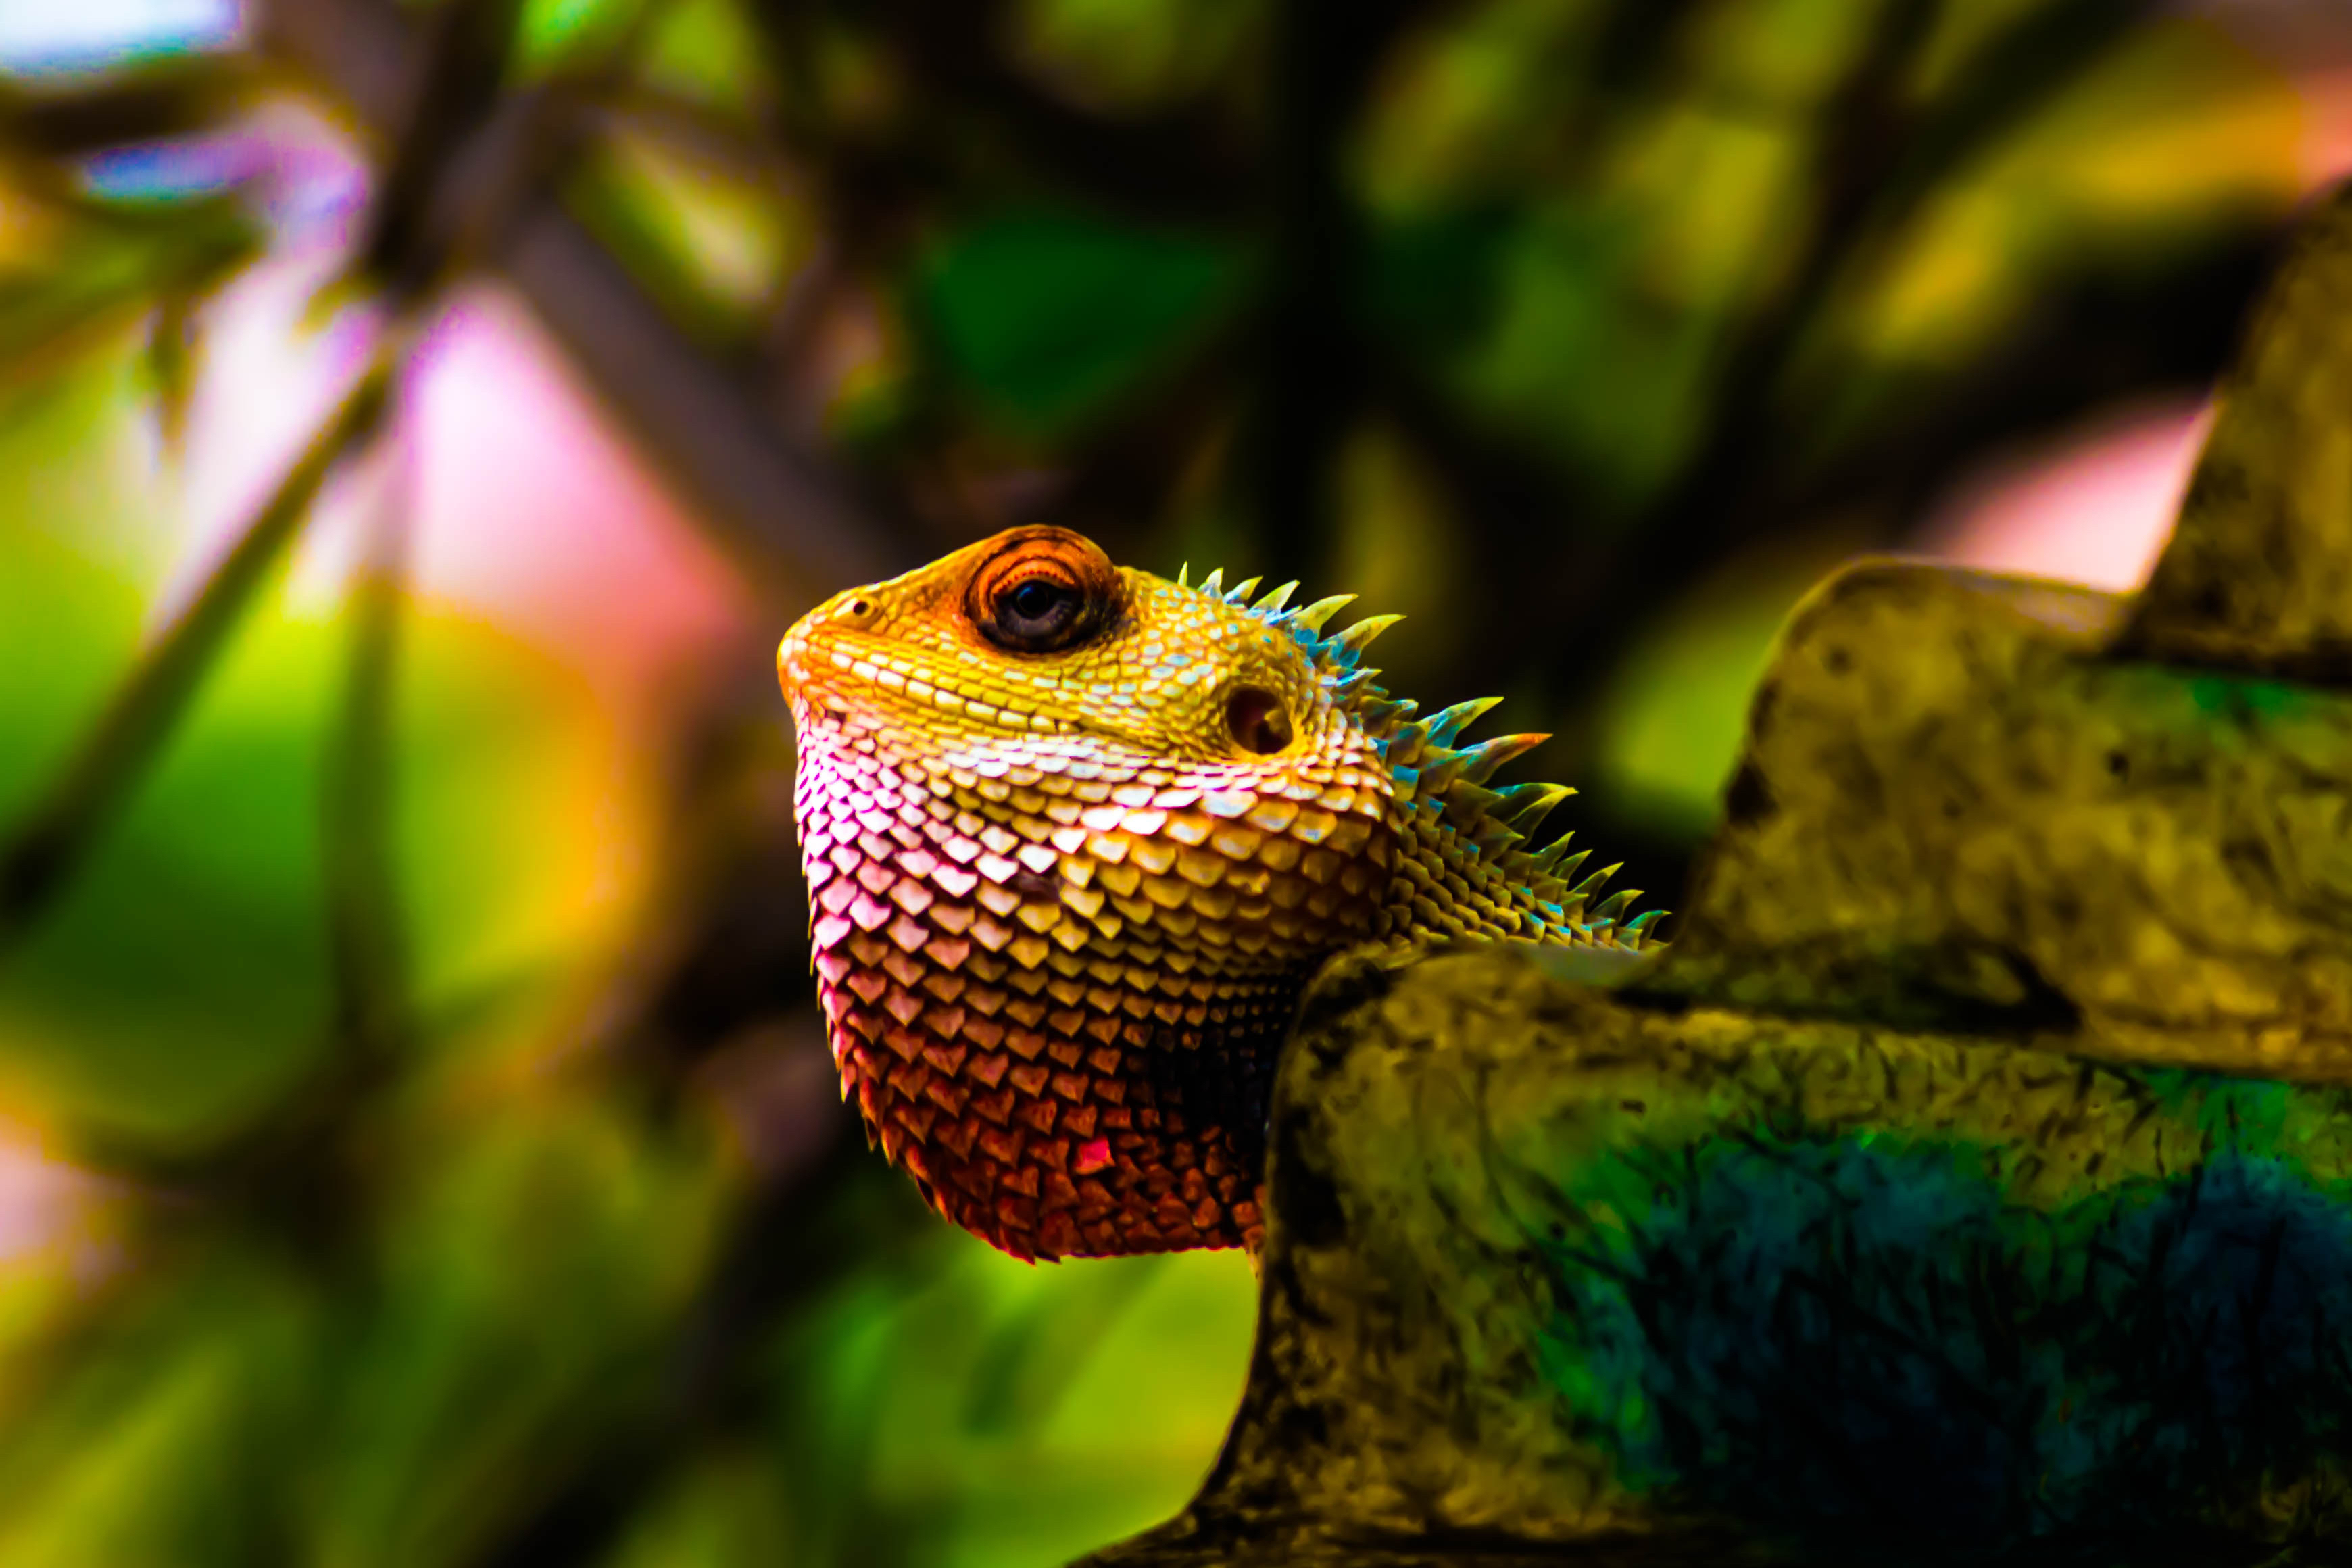 A beautiful chameleon looks at the photographer